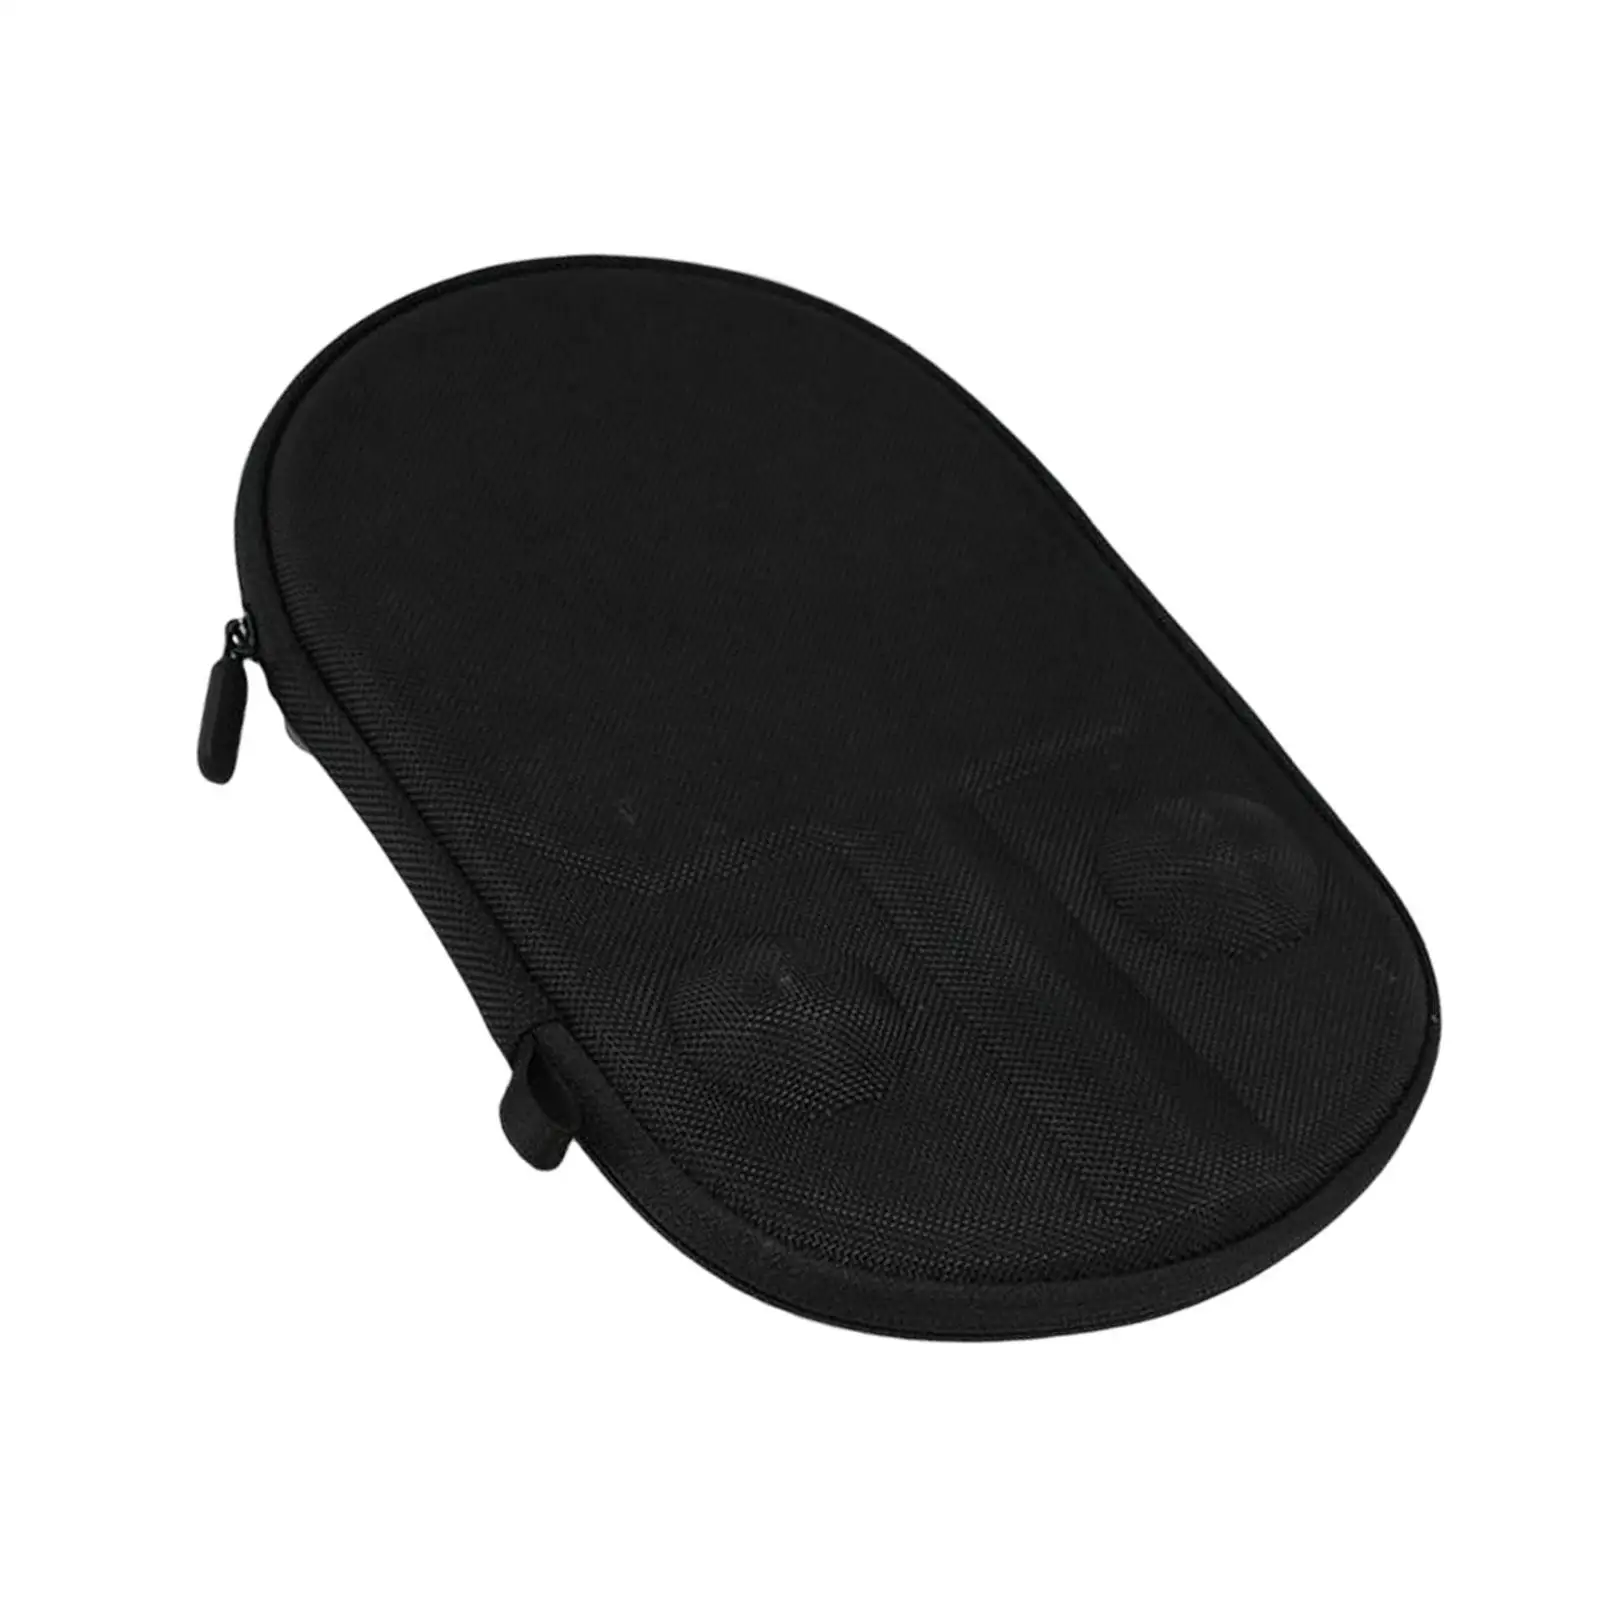 Professional Table Tennis Racket Bag Reusable Lightweight Durable for Travel